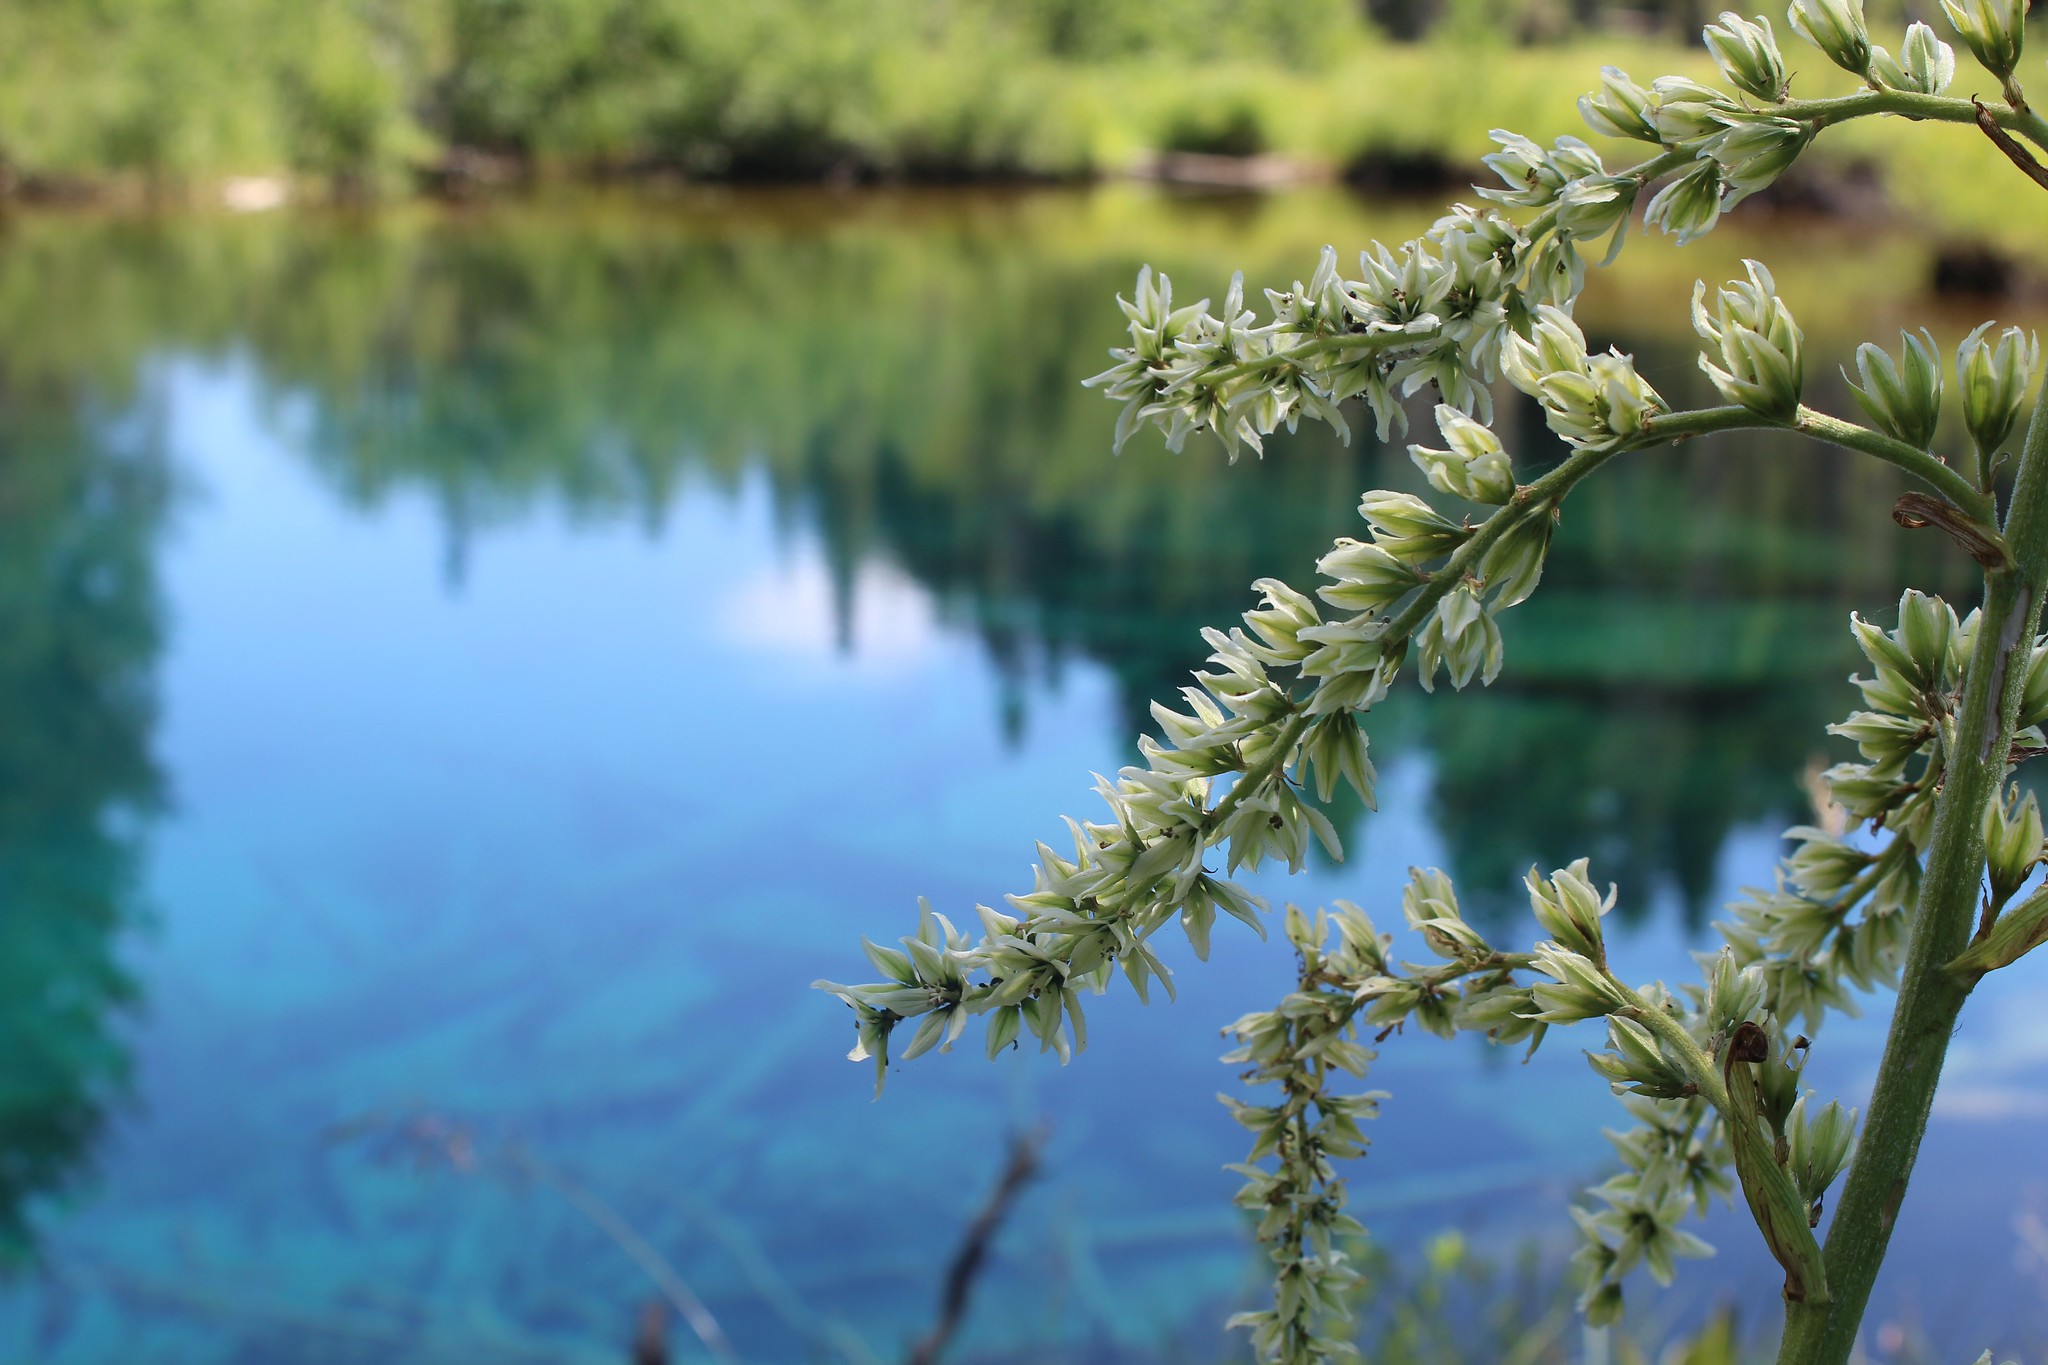 Close up of a water loving plant flowing alongside the deep turquoise blue of Little Crater Lake. The lake and its perimeter are out of focus, honing in on the delicacy of the pale green flowers.